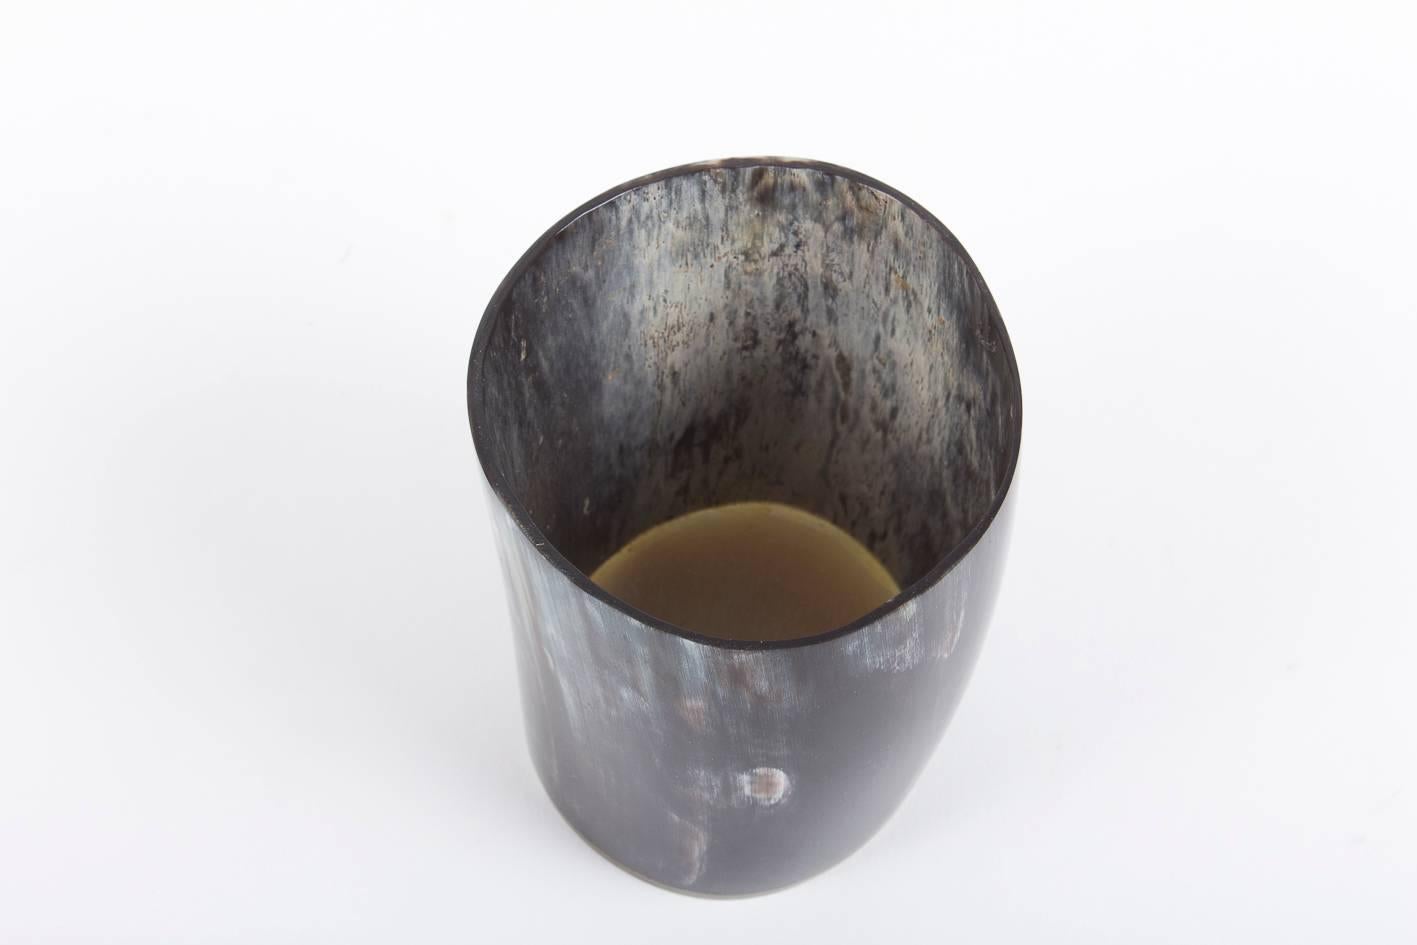 An incredibly well preserved horn cup by Auböck Vienna.
The base glued to the polished Horn.